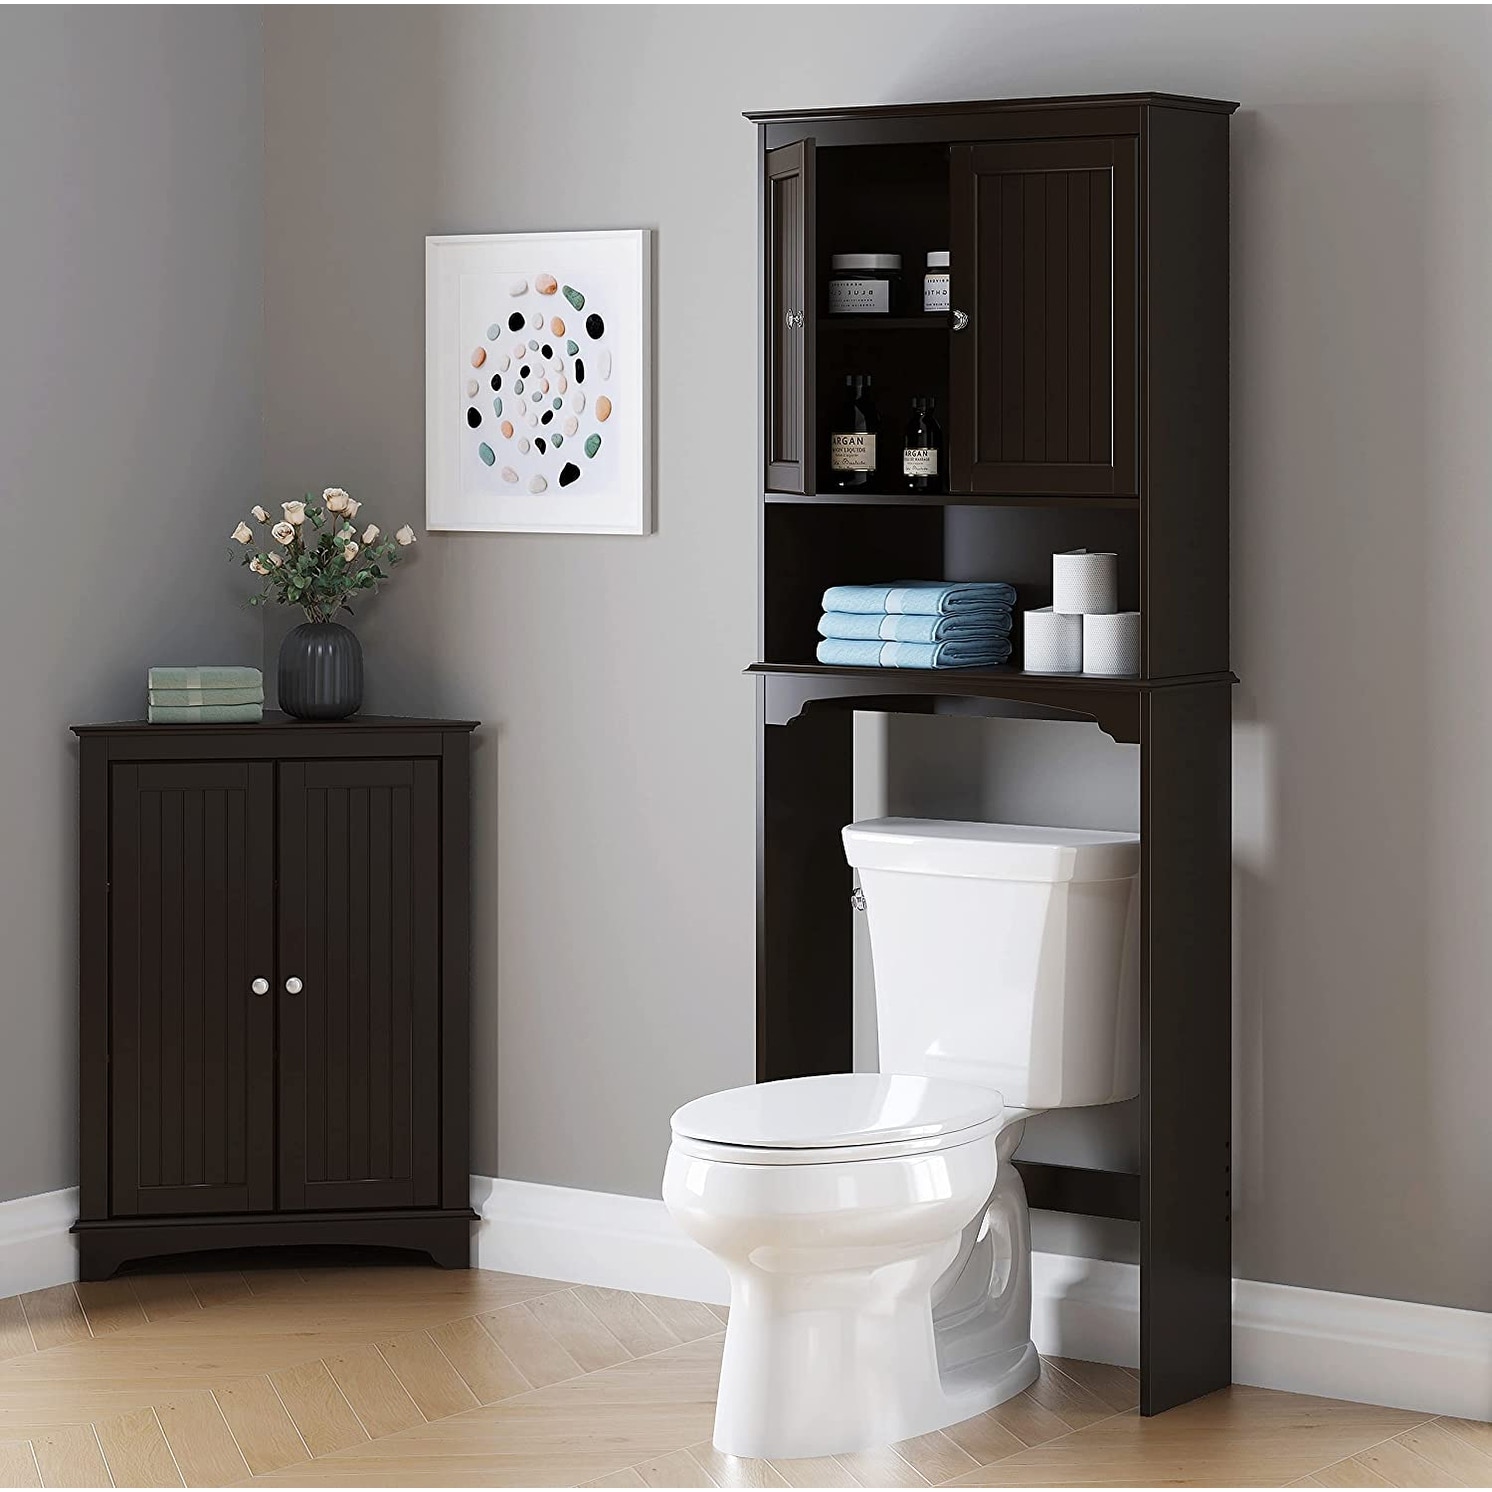 https://ak1.ostkcdn.com/images/products/is/images/direct/dbd198c3cf675c589df167e1da310230d9d44d3d/Spirich-Bathroom-Shelf-Storage-Cabinet-Over-the-Toilet-with-door%2CCollection-Spacesaver%2CWhite.jpg